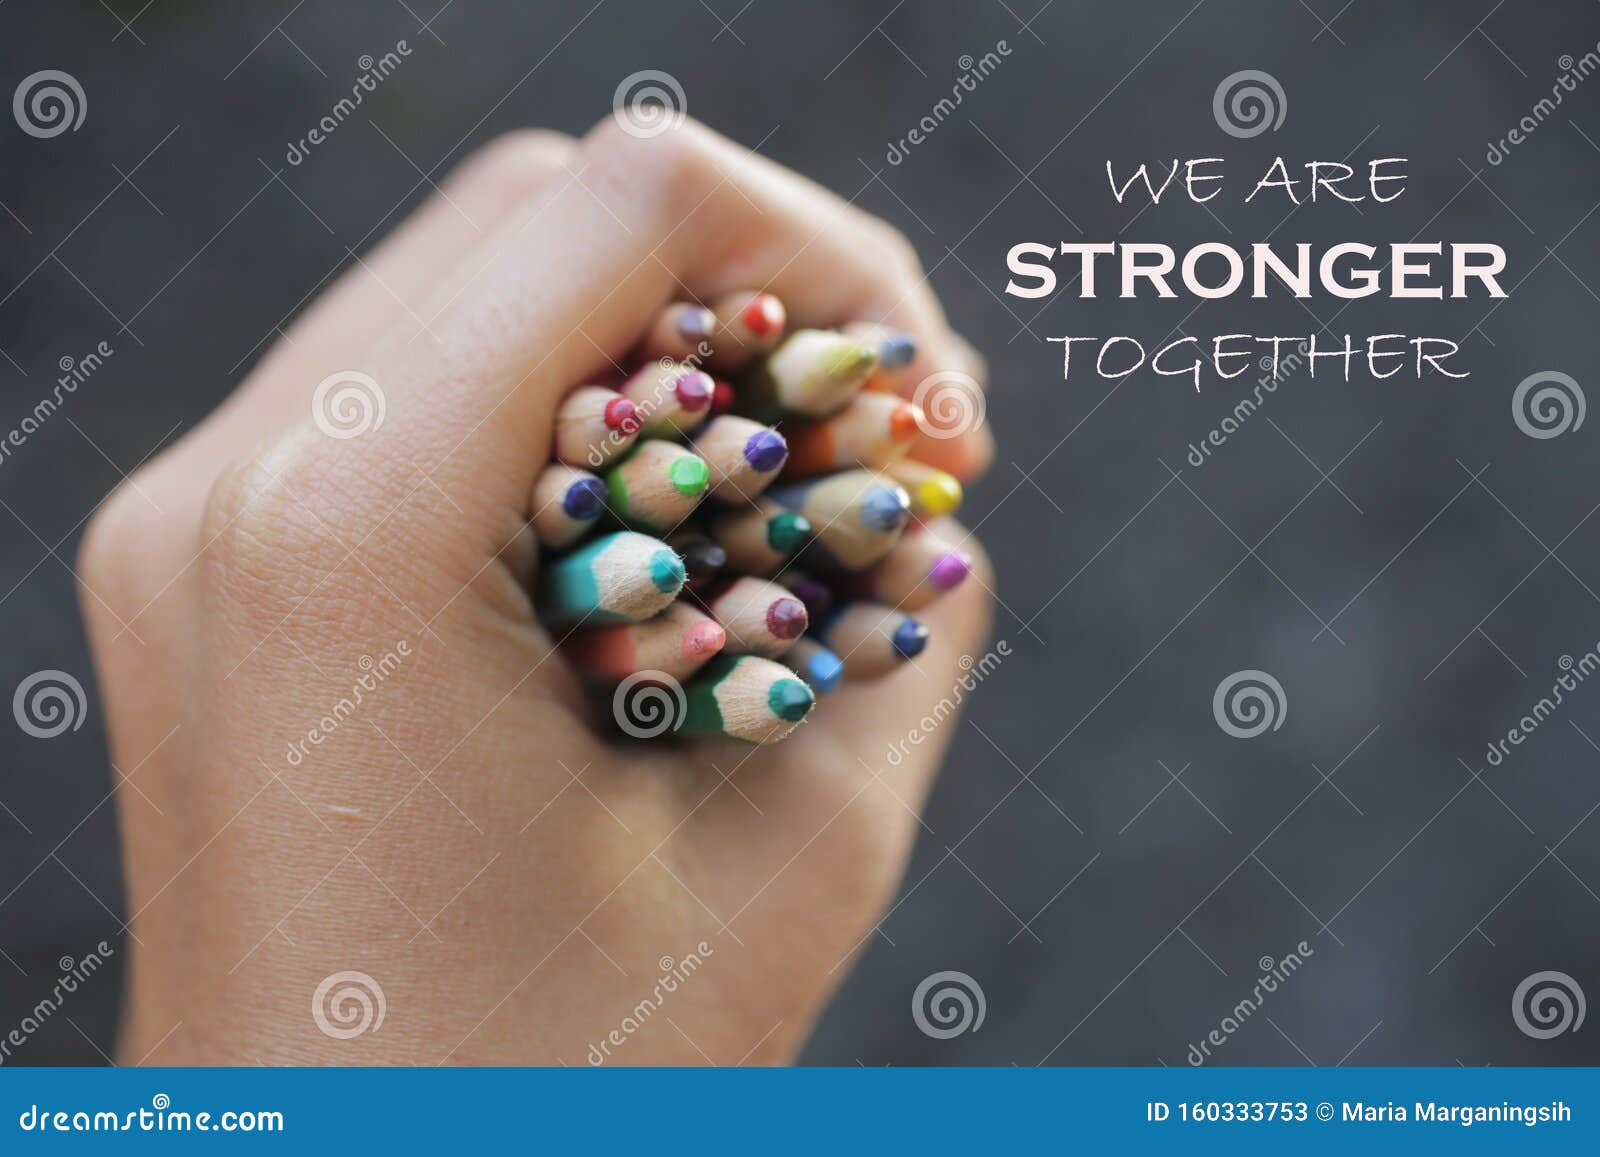 inspirational quote - we are strong together. with bunch of colored pencils in hand.